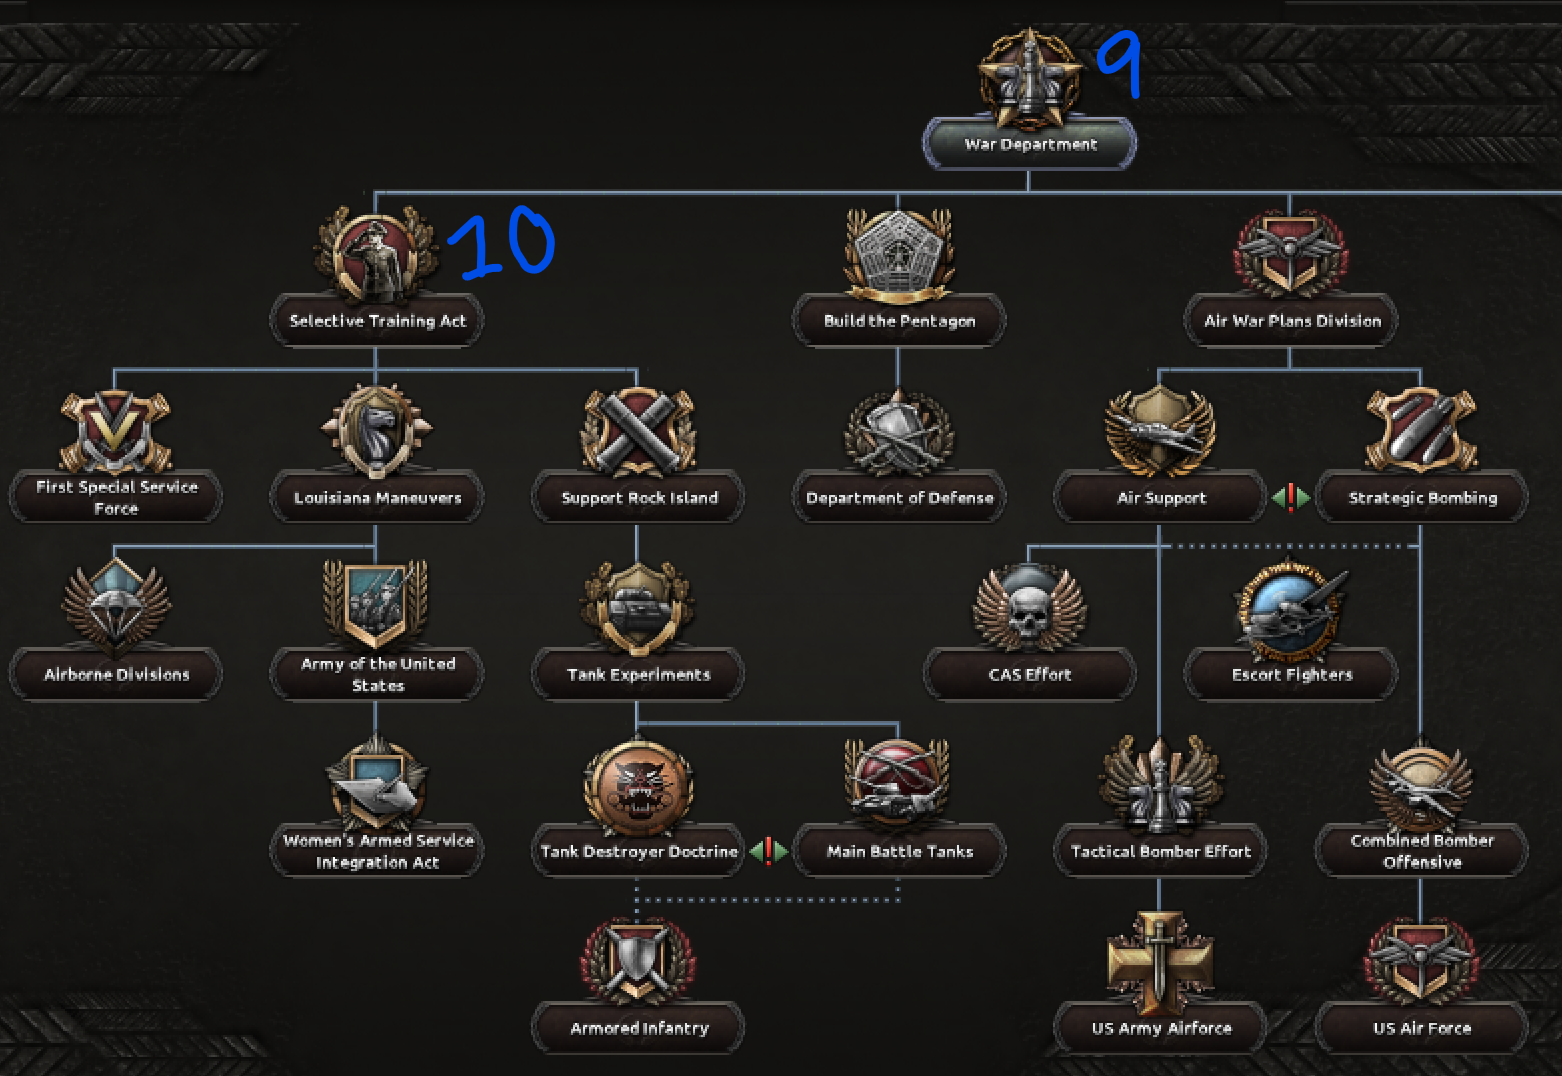 Hearts of Iron IV Best Path Tree Guide (No DLC) - The path I take in the focus tree - 13F3D3C